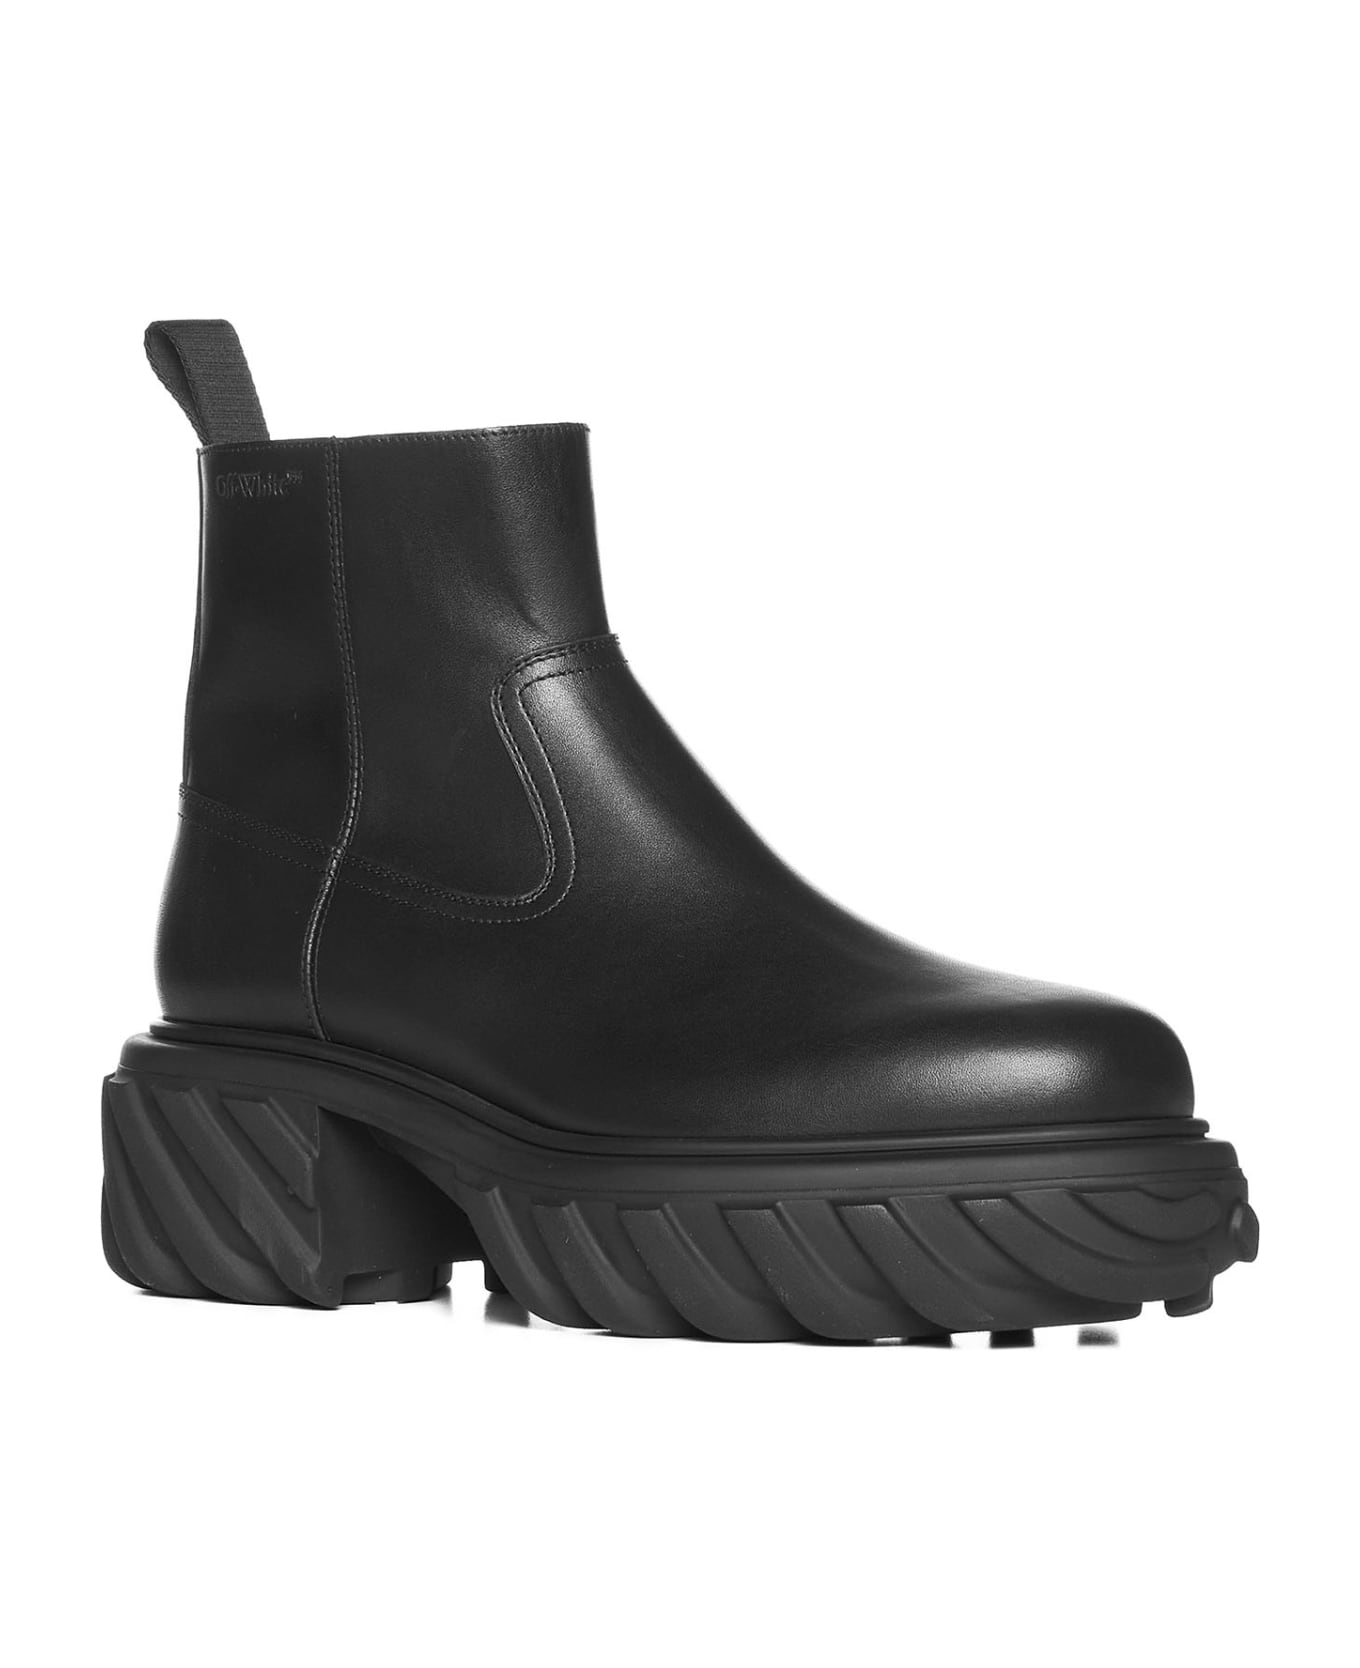 Off-White Tractor Motor Ankle Boots - Black ブーツ